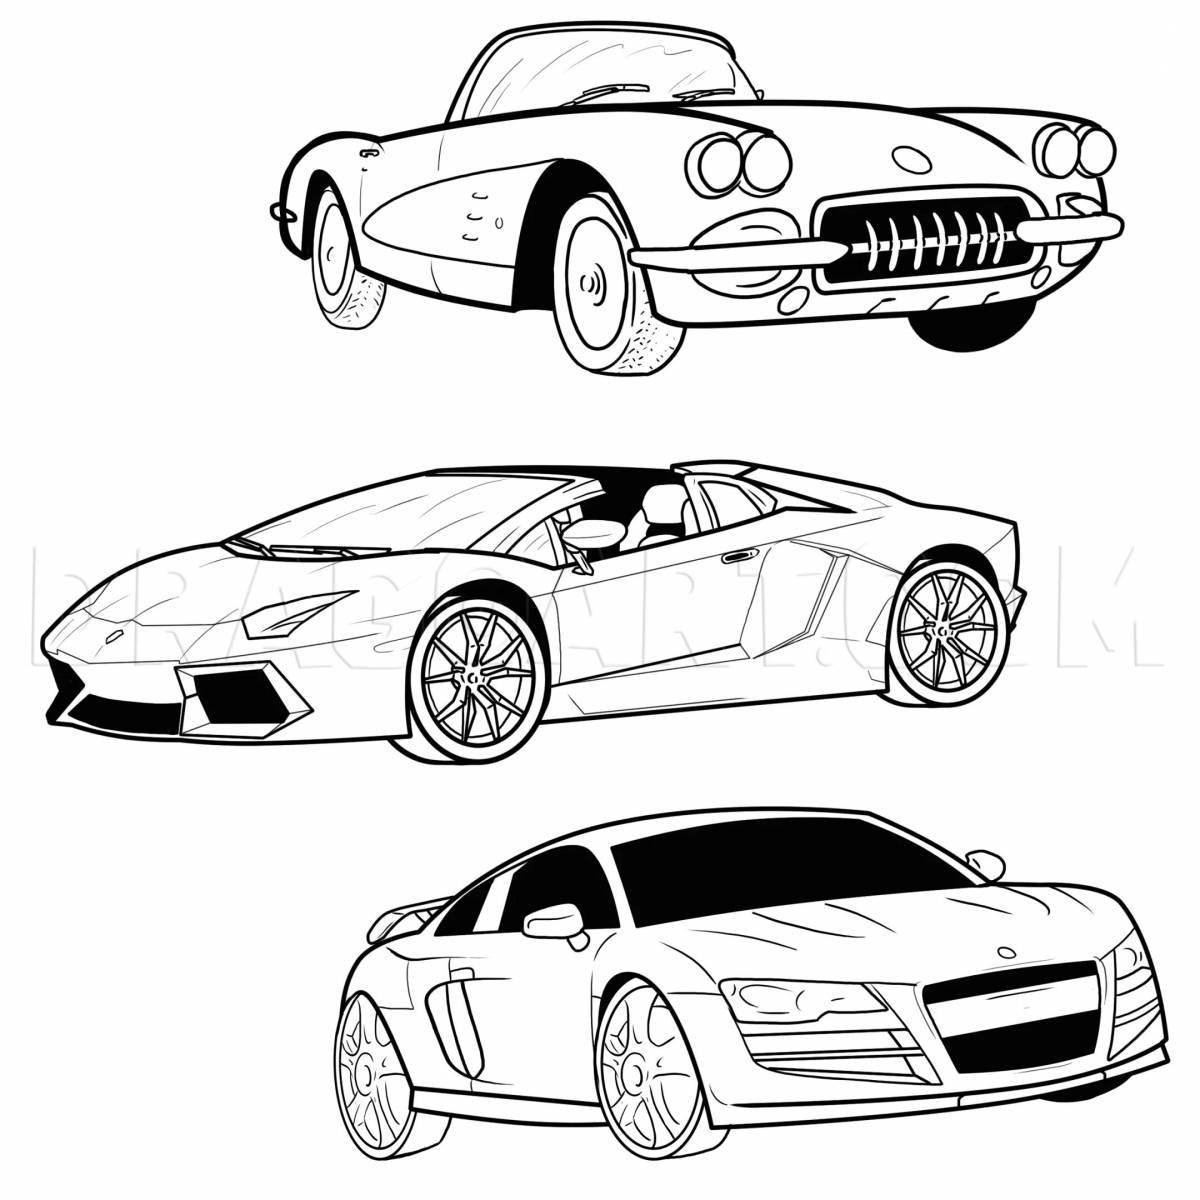 Coloring page stylish cars